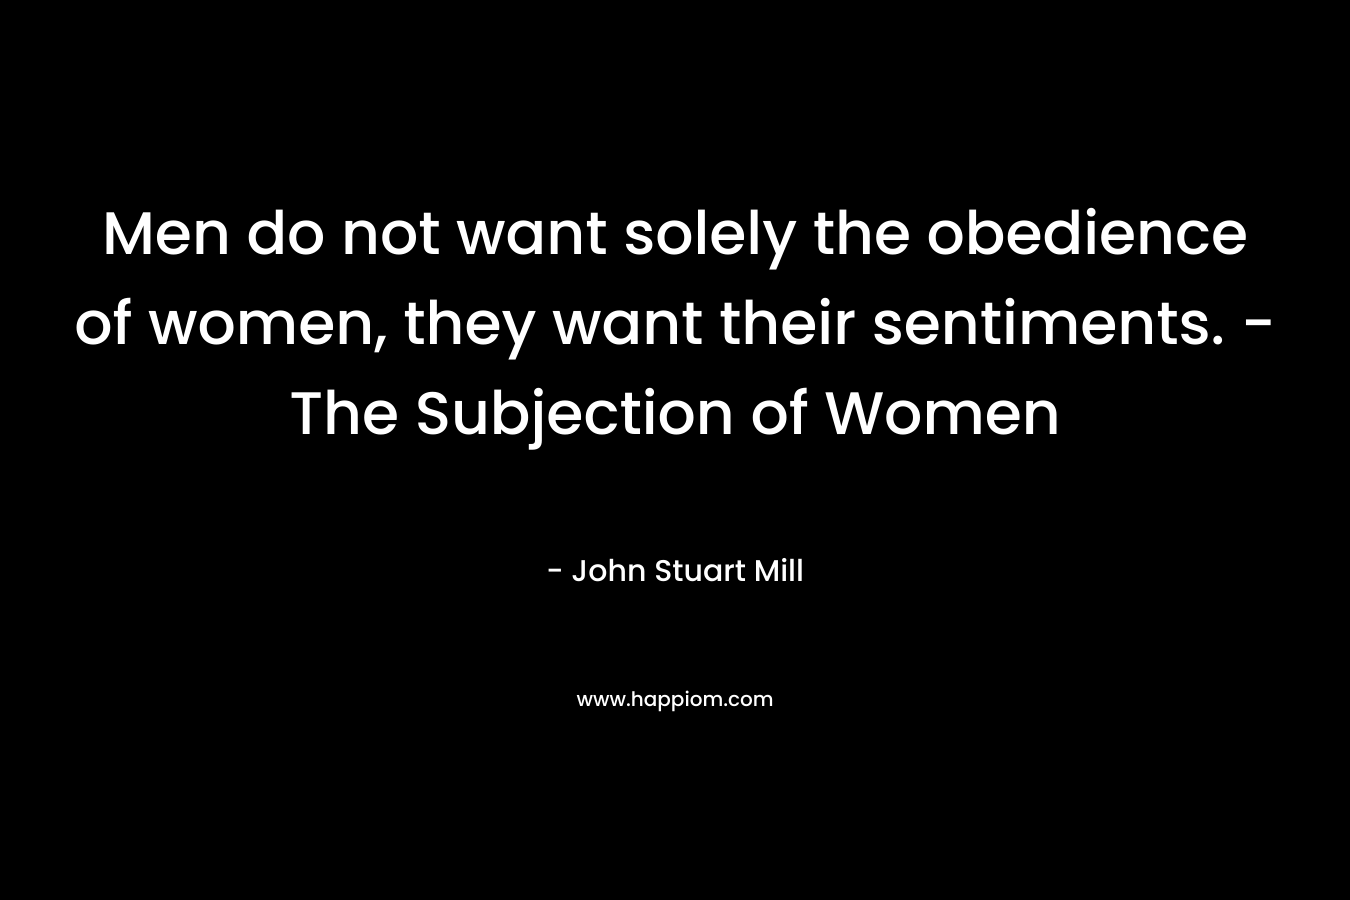 Men do not want solely the obedience of women, they want their sentiments. -The Subjection of Women